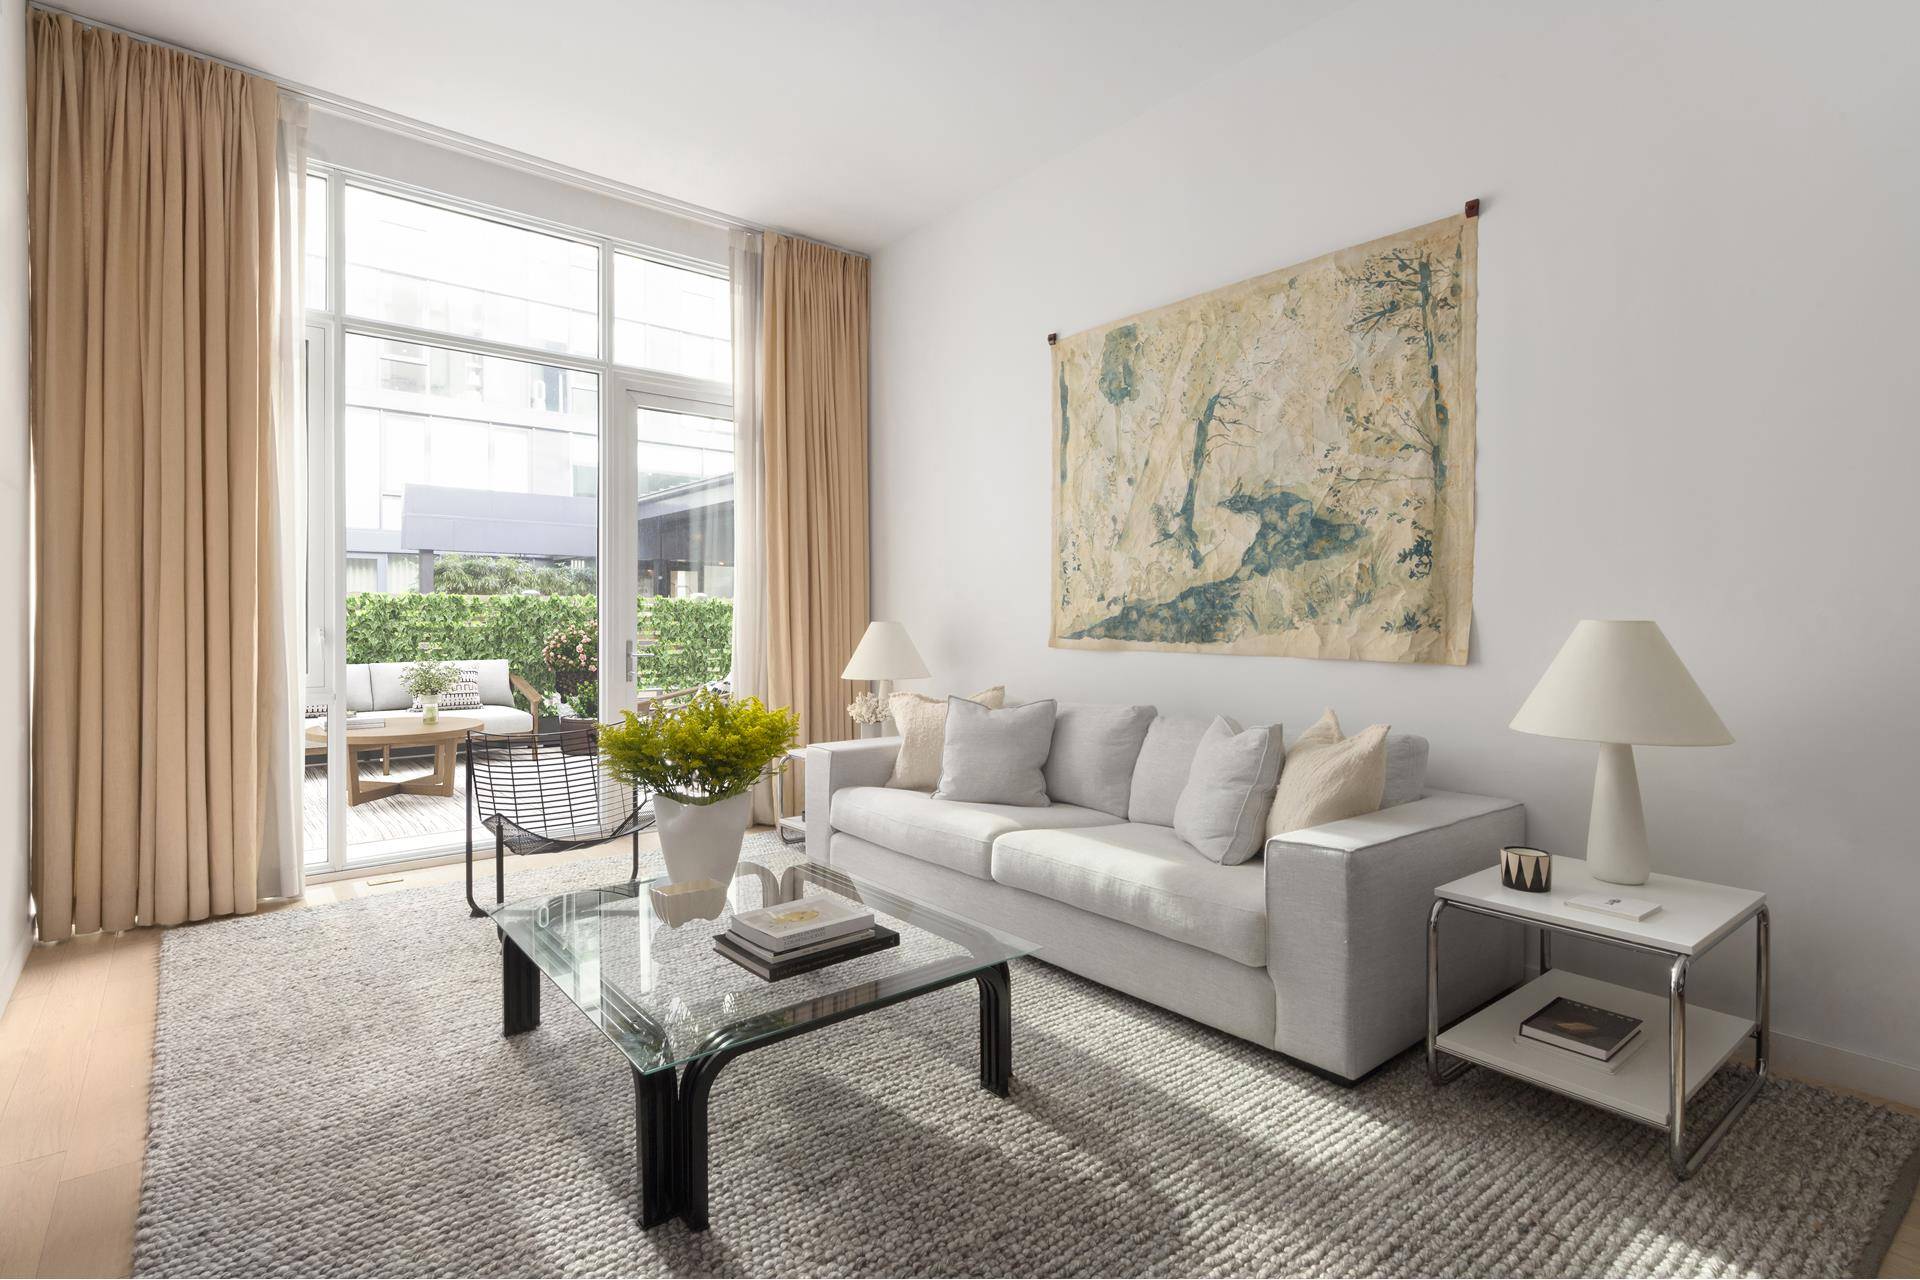 Step into the epitome of urban living, a luxurious 2 bedroom, 2 bathroom condo oasis featuring a spectacular 400 square feet private terrace !